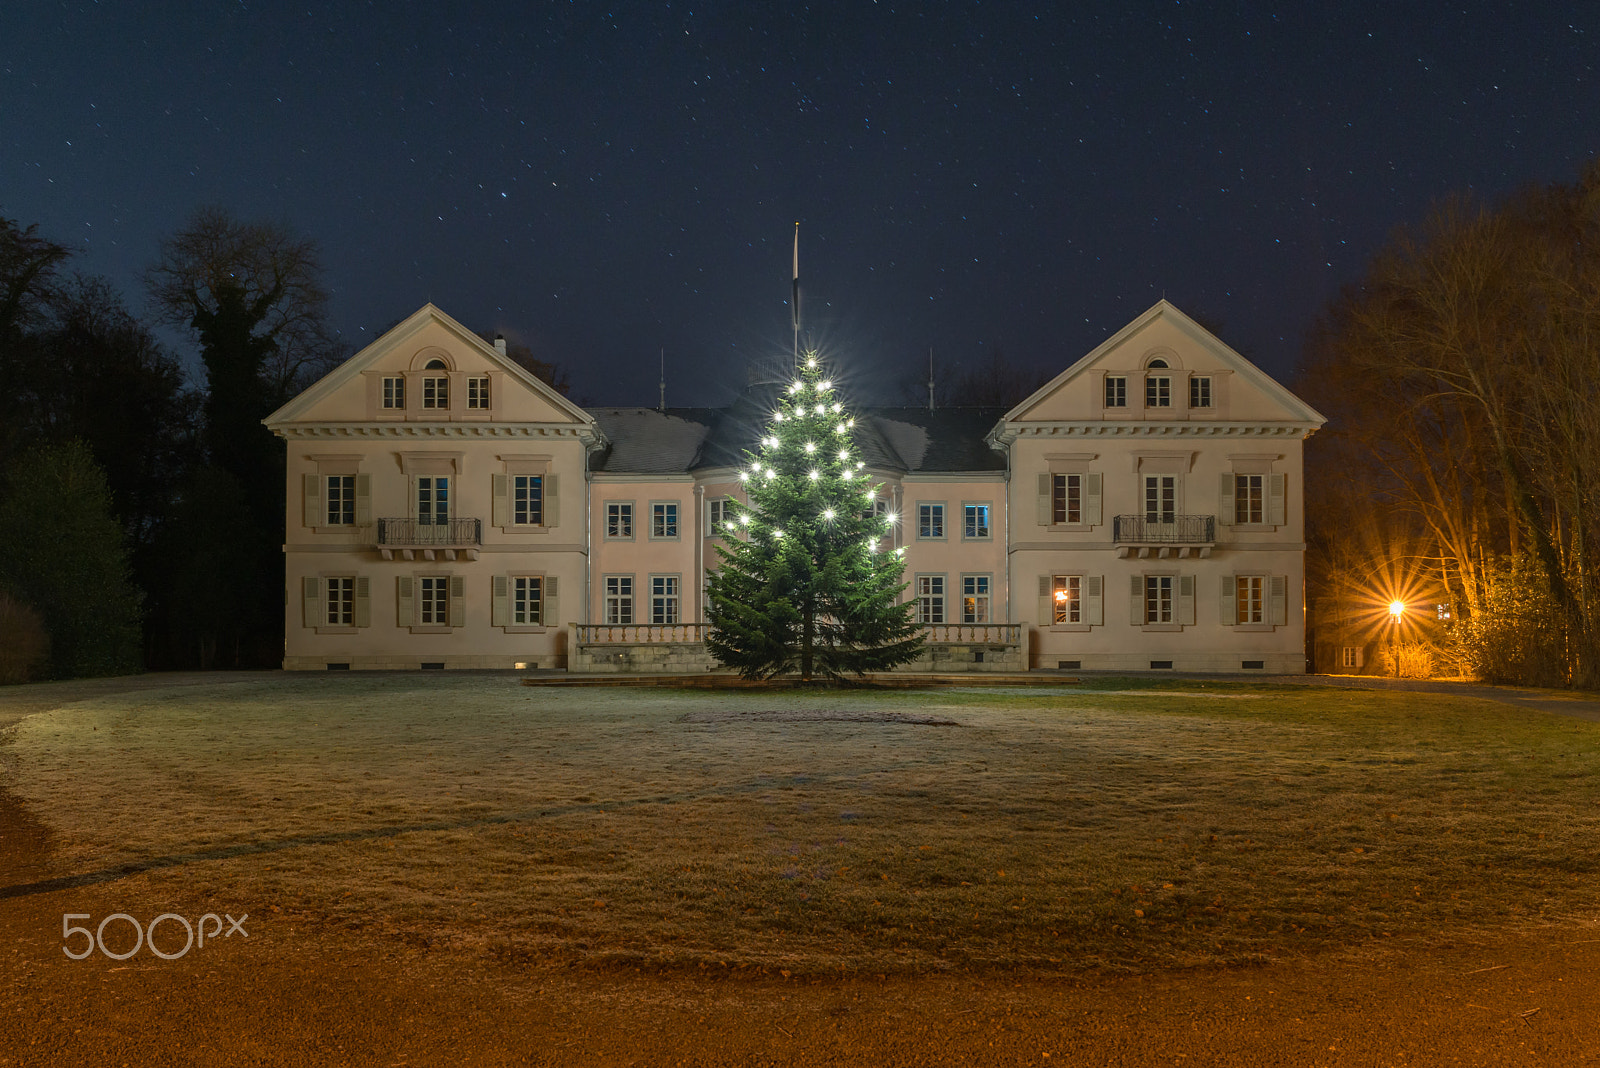 Nikon D800 sample photo. Villa eugenia in hechingen at night with christmas photography